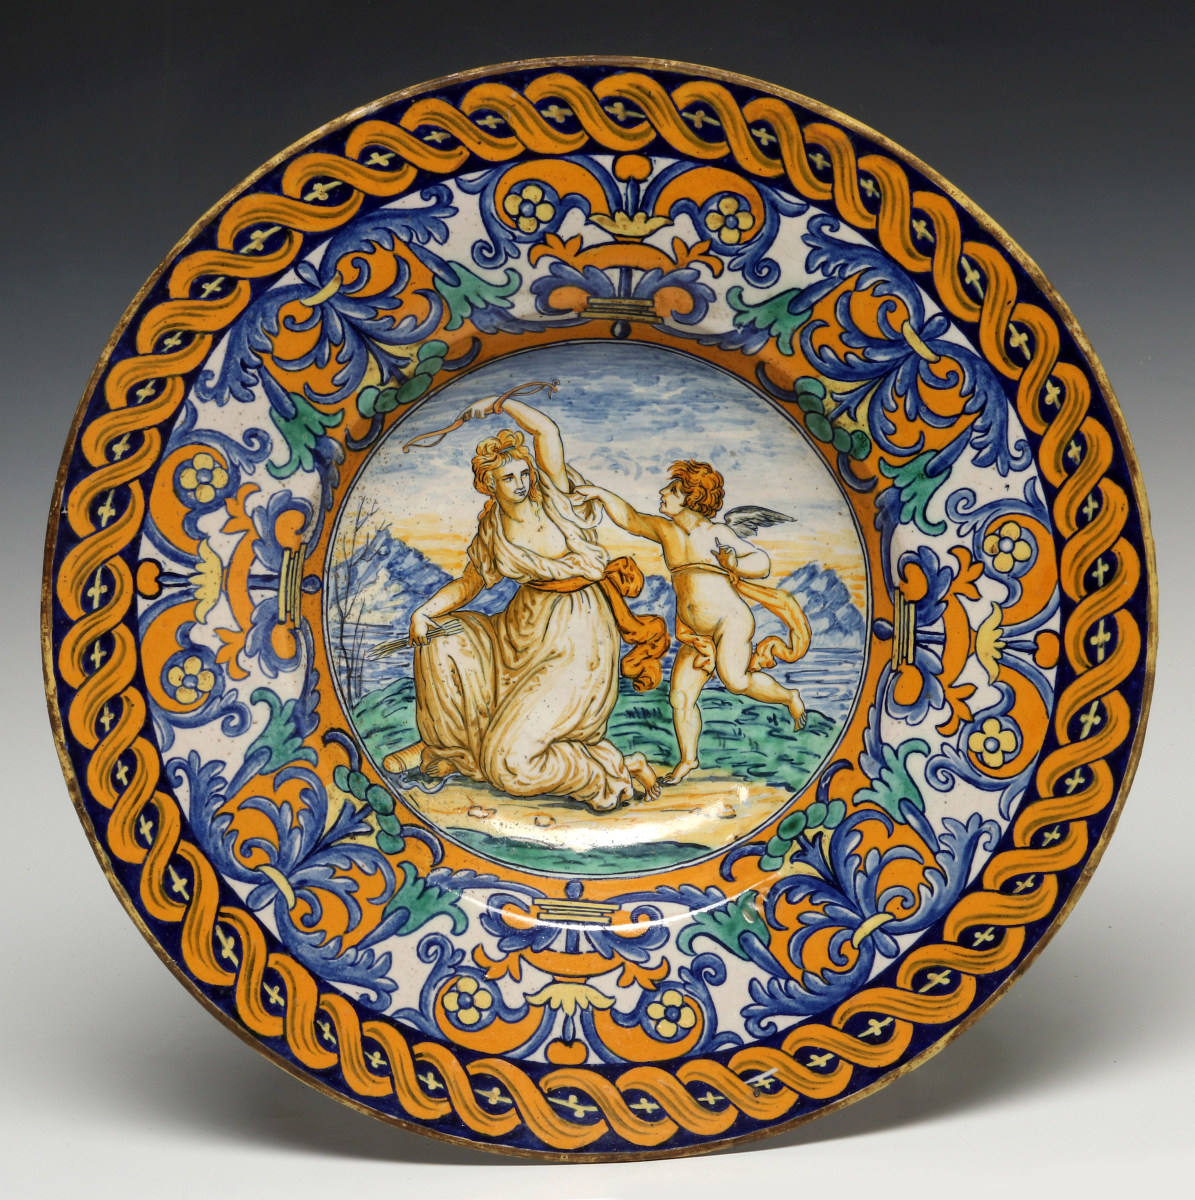 A MIDDLE 19TH C. ITALIAN MAIOLICA FAIENCE CHARGER